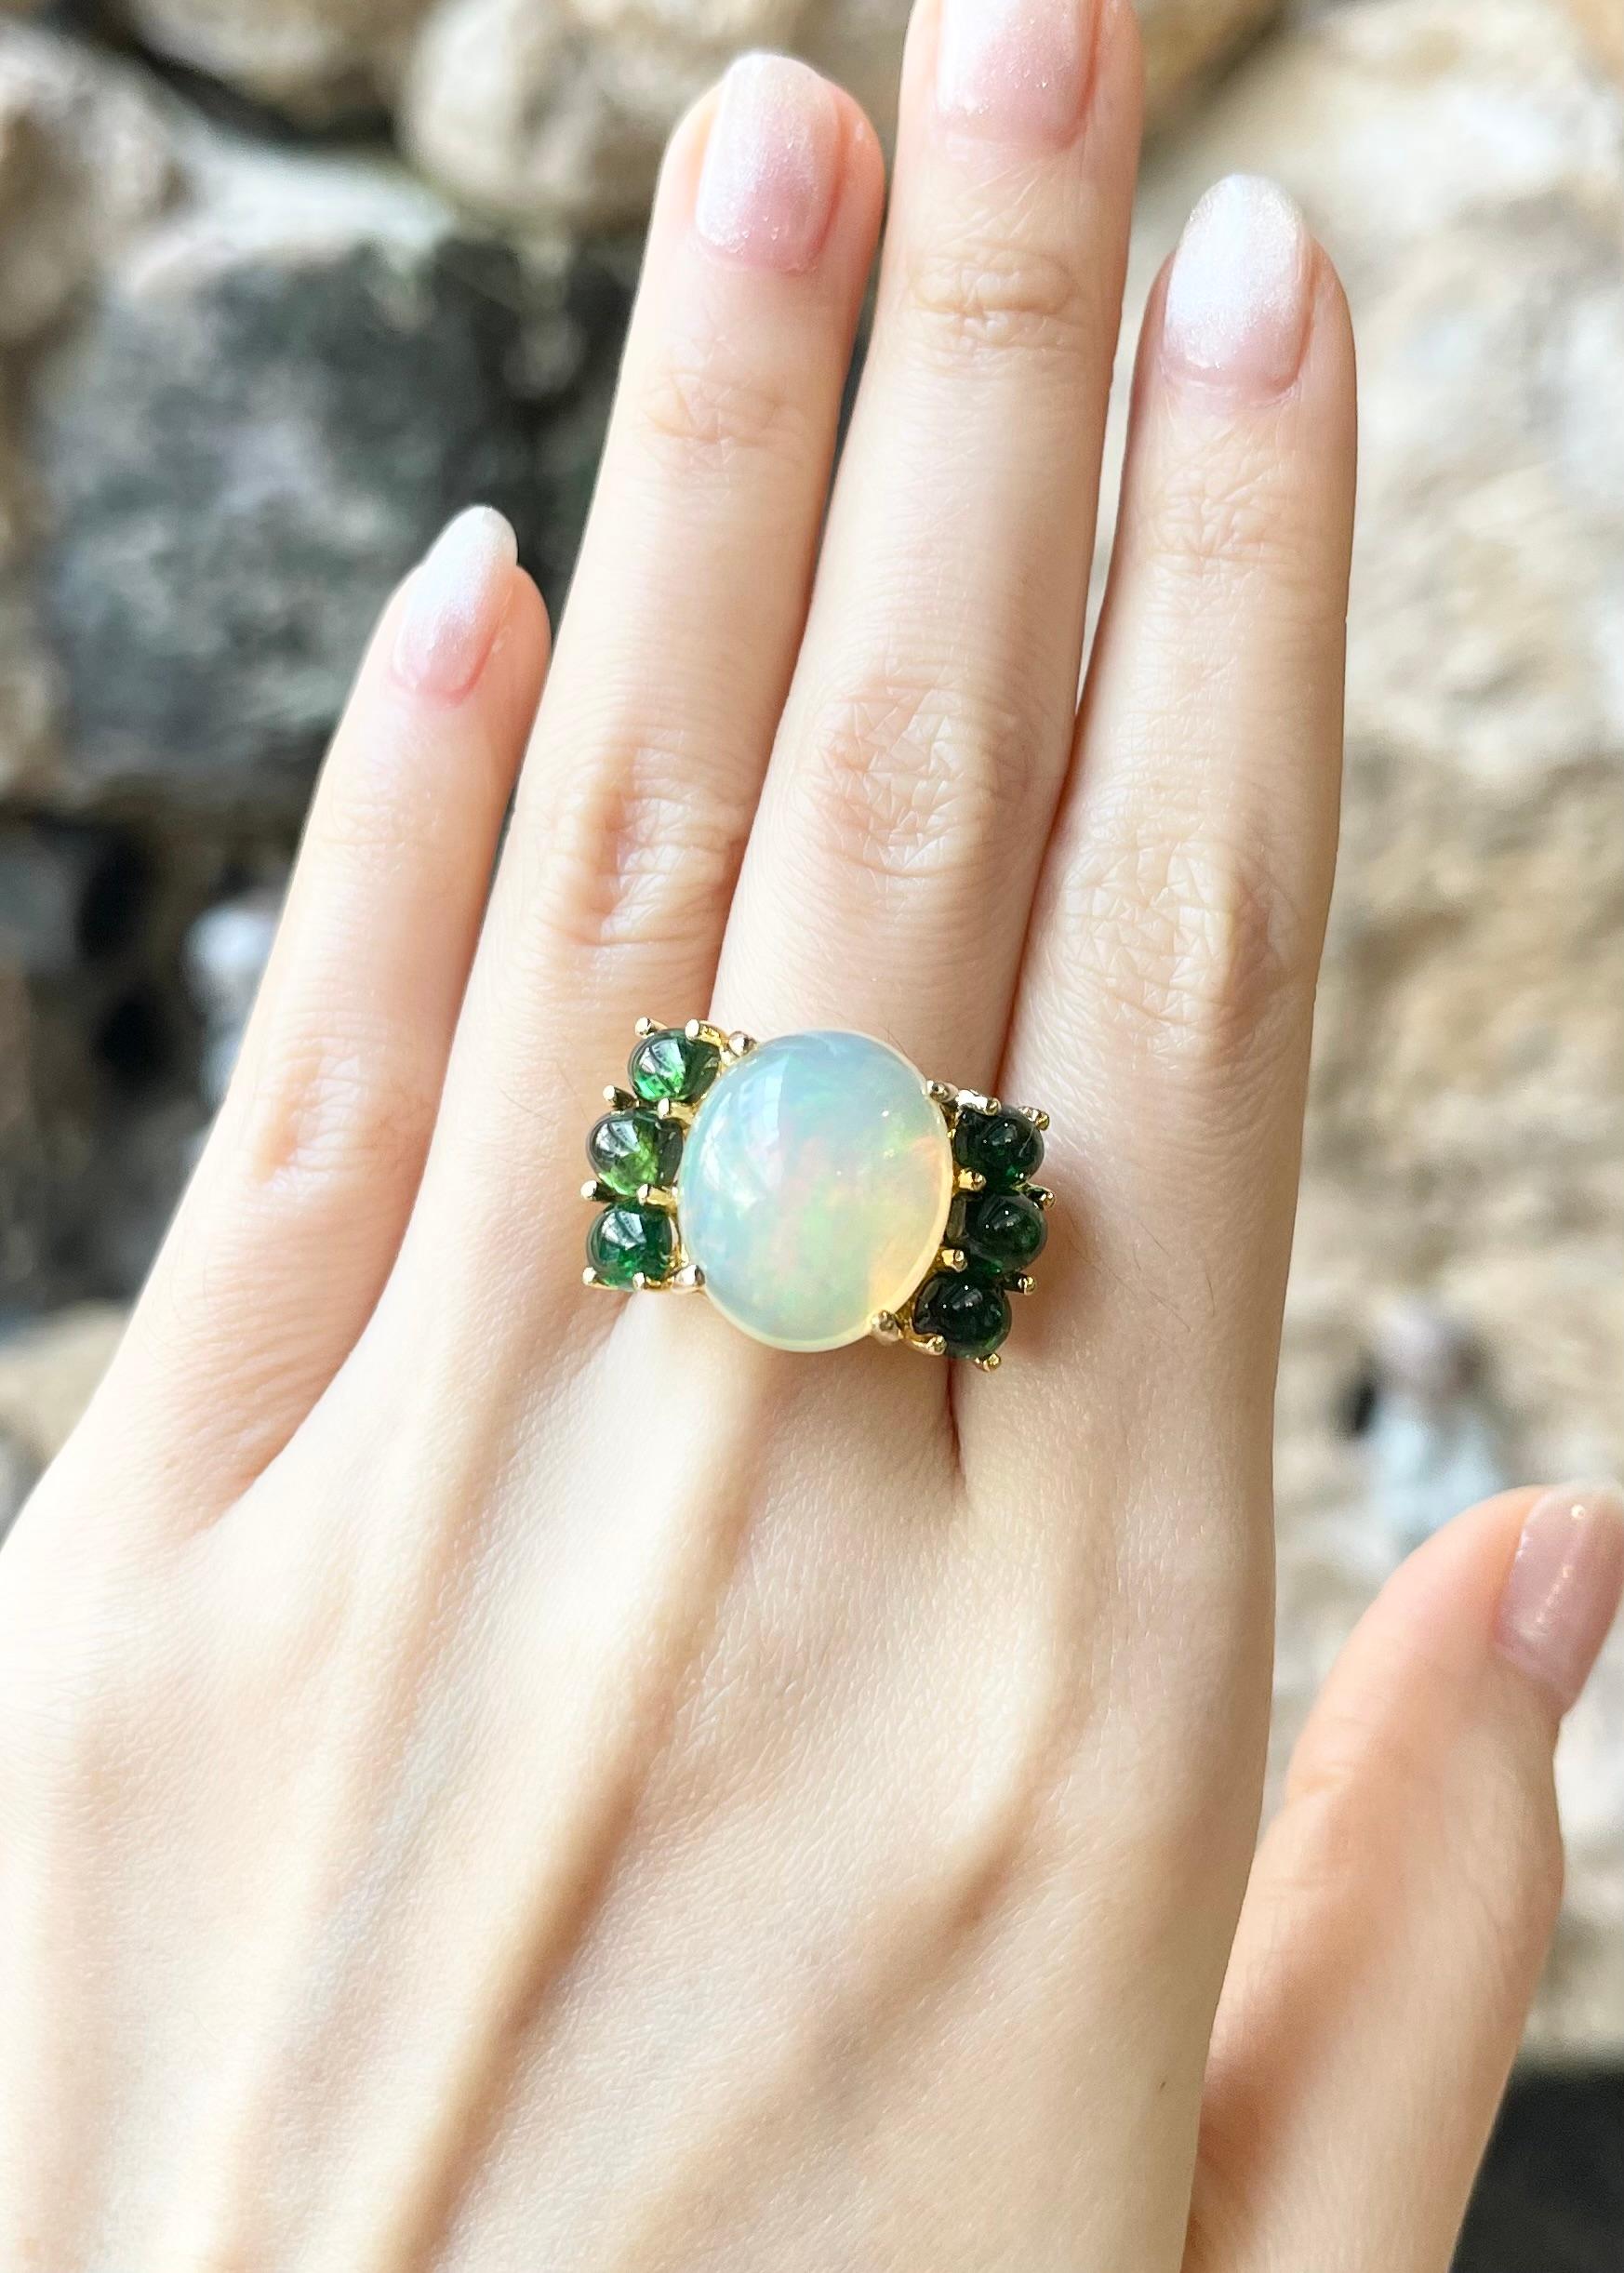 Opal 9.79 carats with Green Tourmaline 4.43 carat Ring set in 18K Gold Settings

Width:  2.5 cm 
Length: 1.5 cm
Ring Size: 53
Total Weight: 11.35 grams

